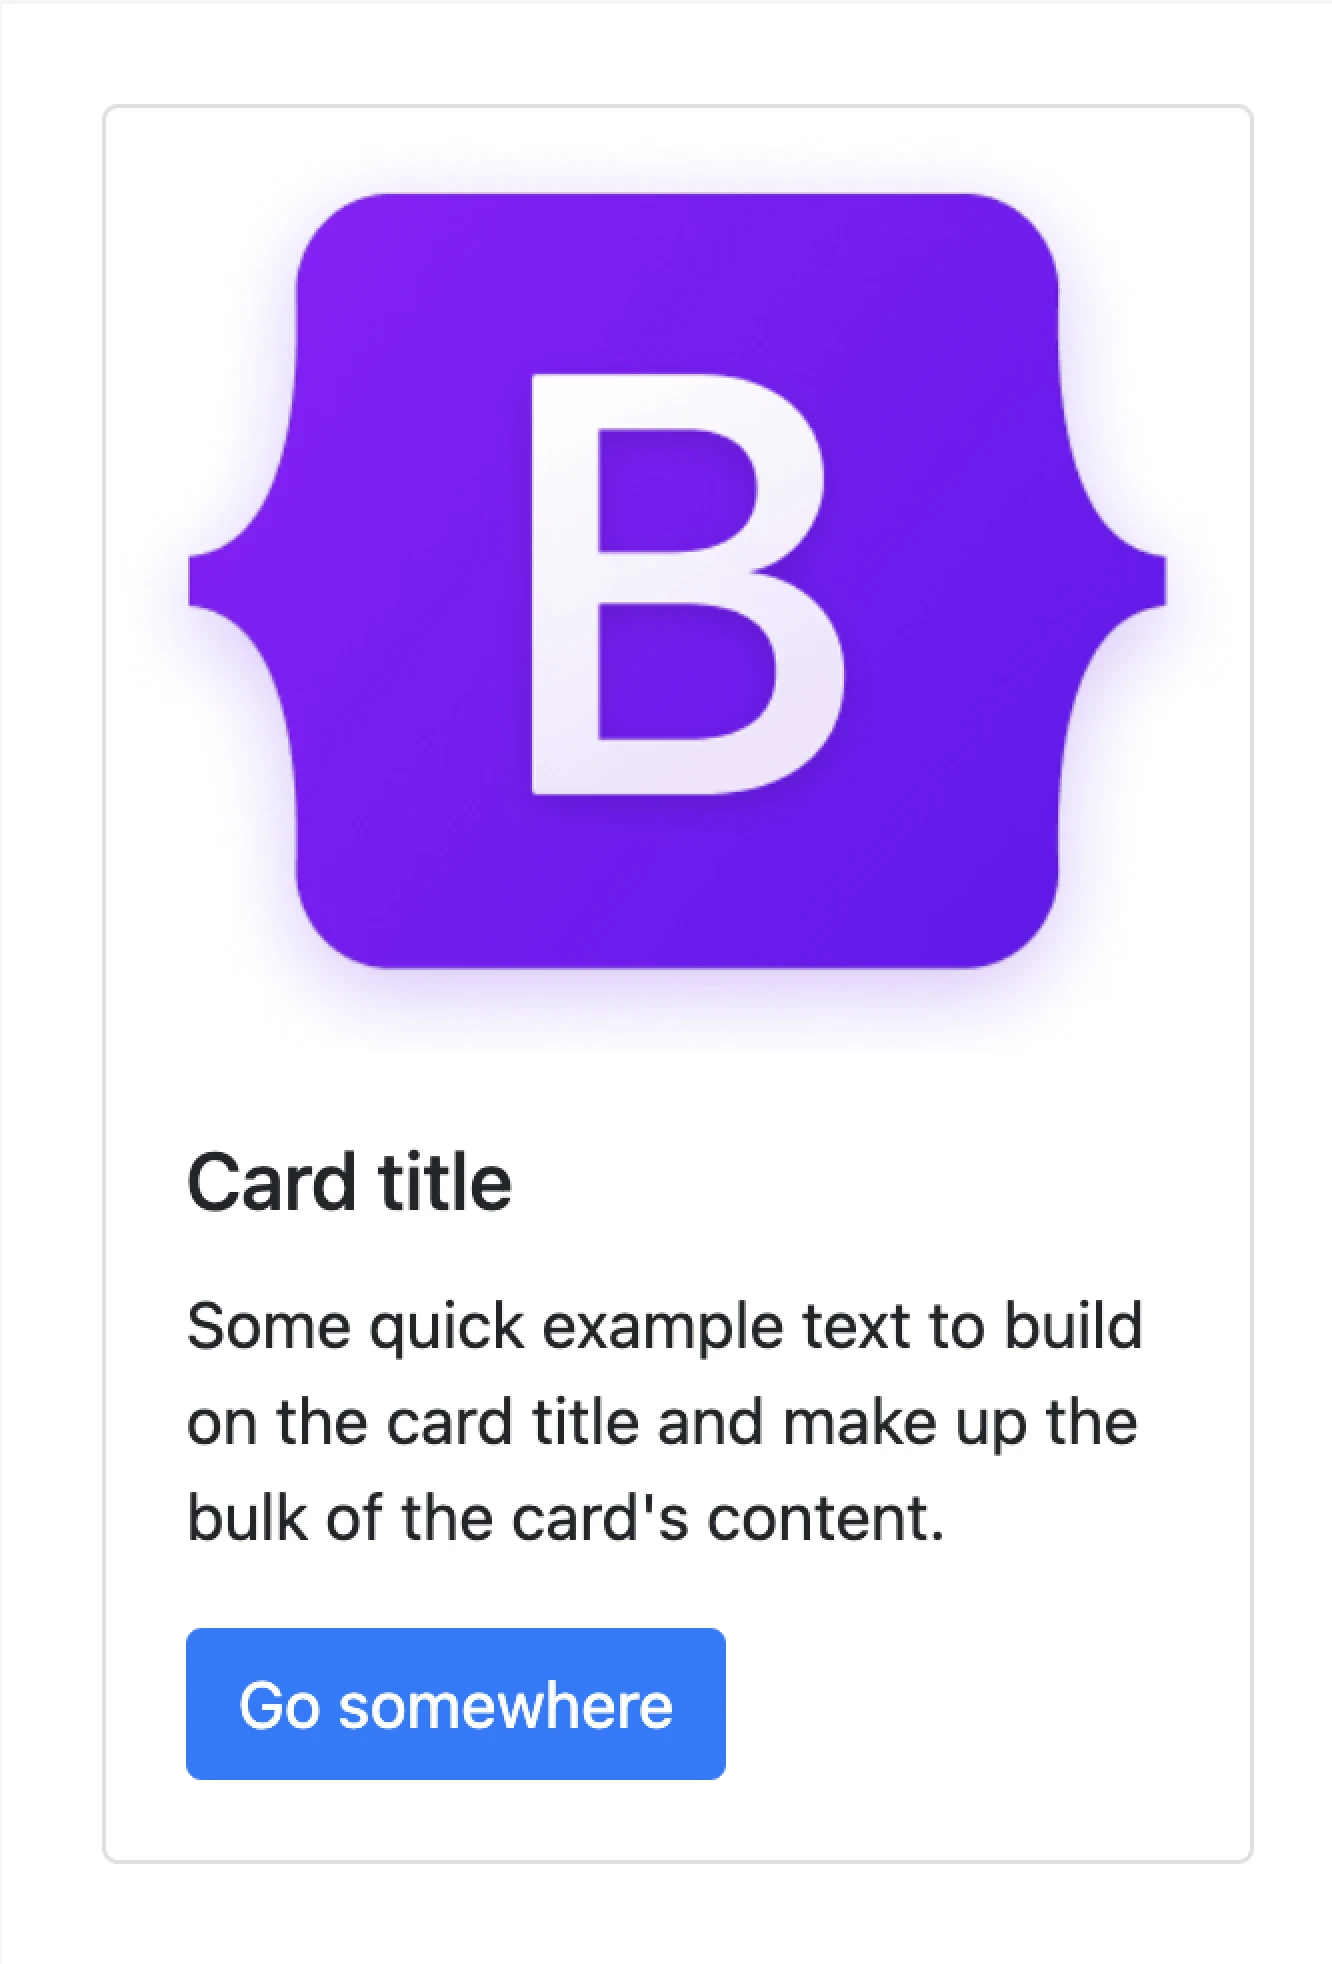 Bootstrap's card title mockup, with the logo, and lorem ispum text for the card's content and button.